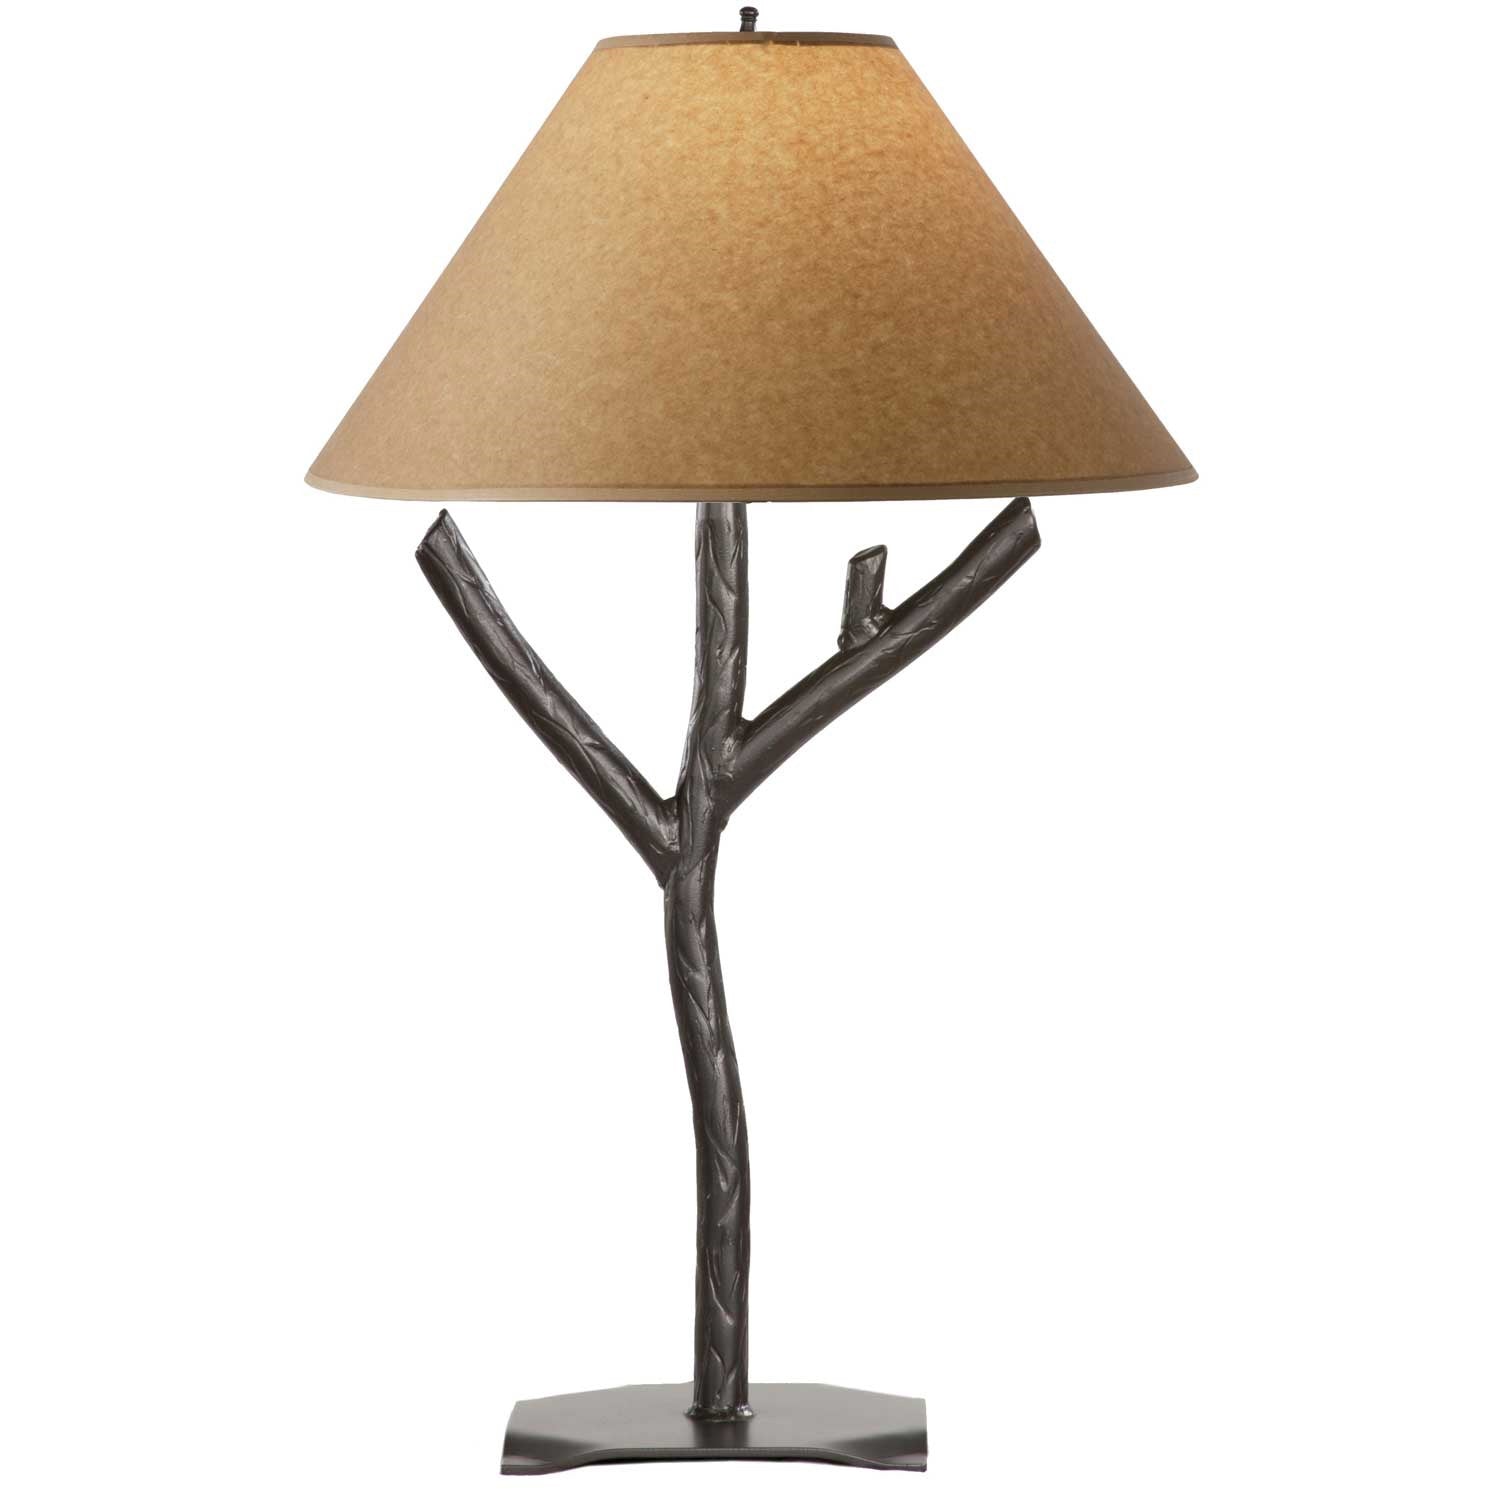 Rustic Wrought Iron Table Lamp, Woodland Table Lamp